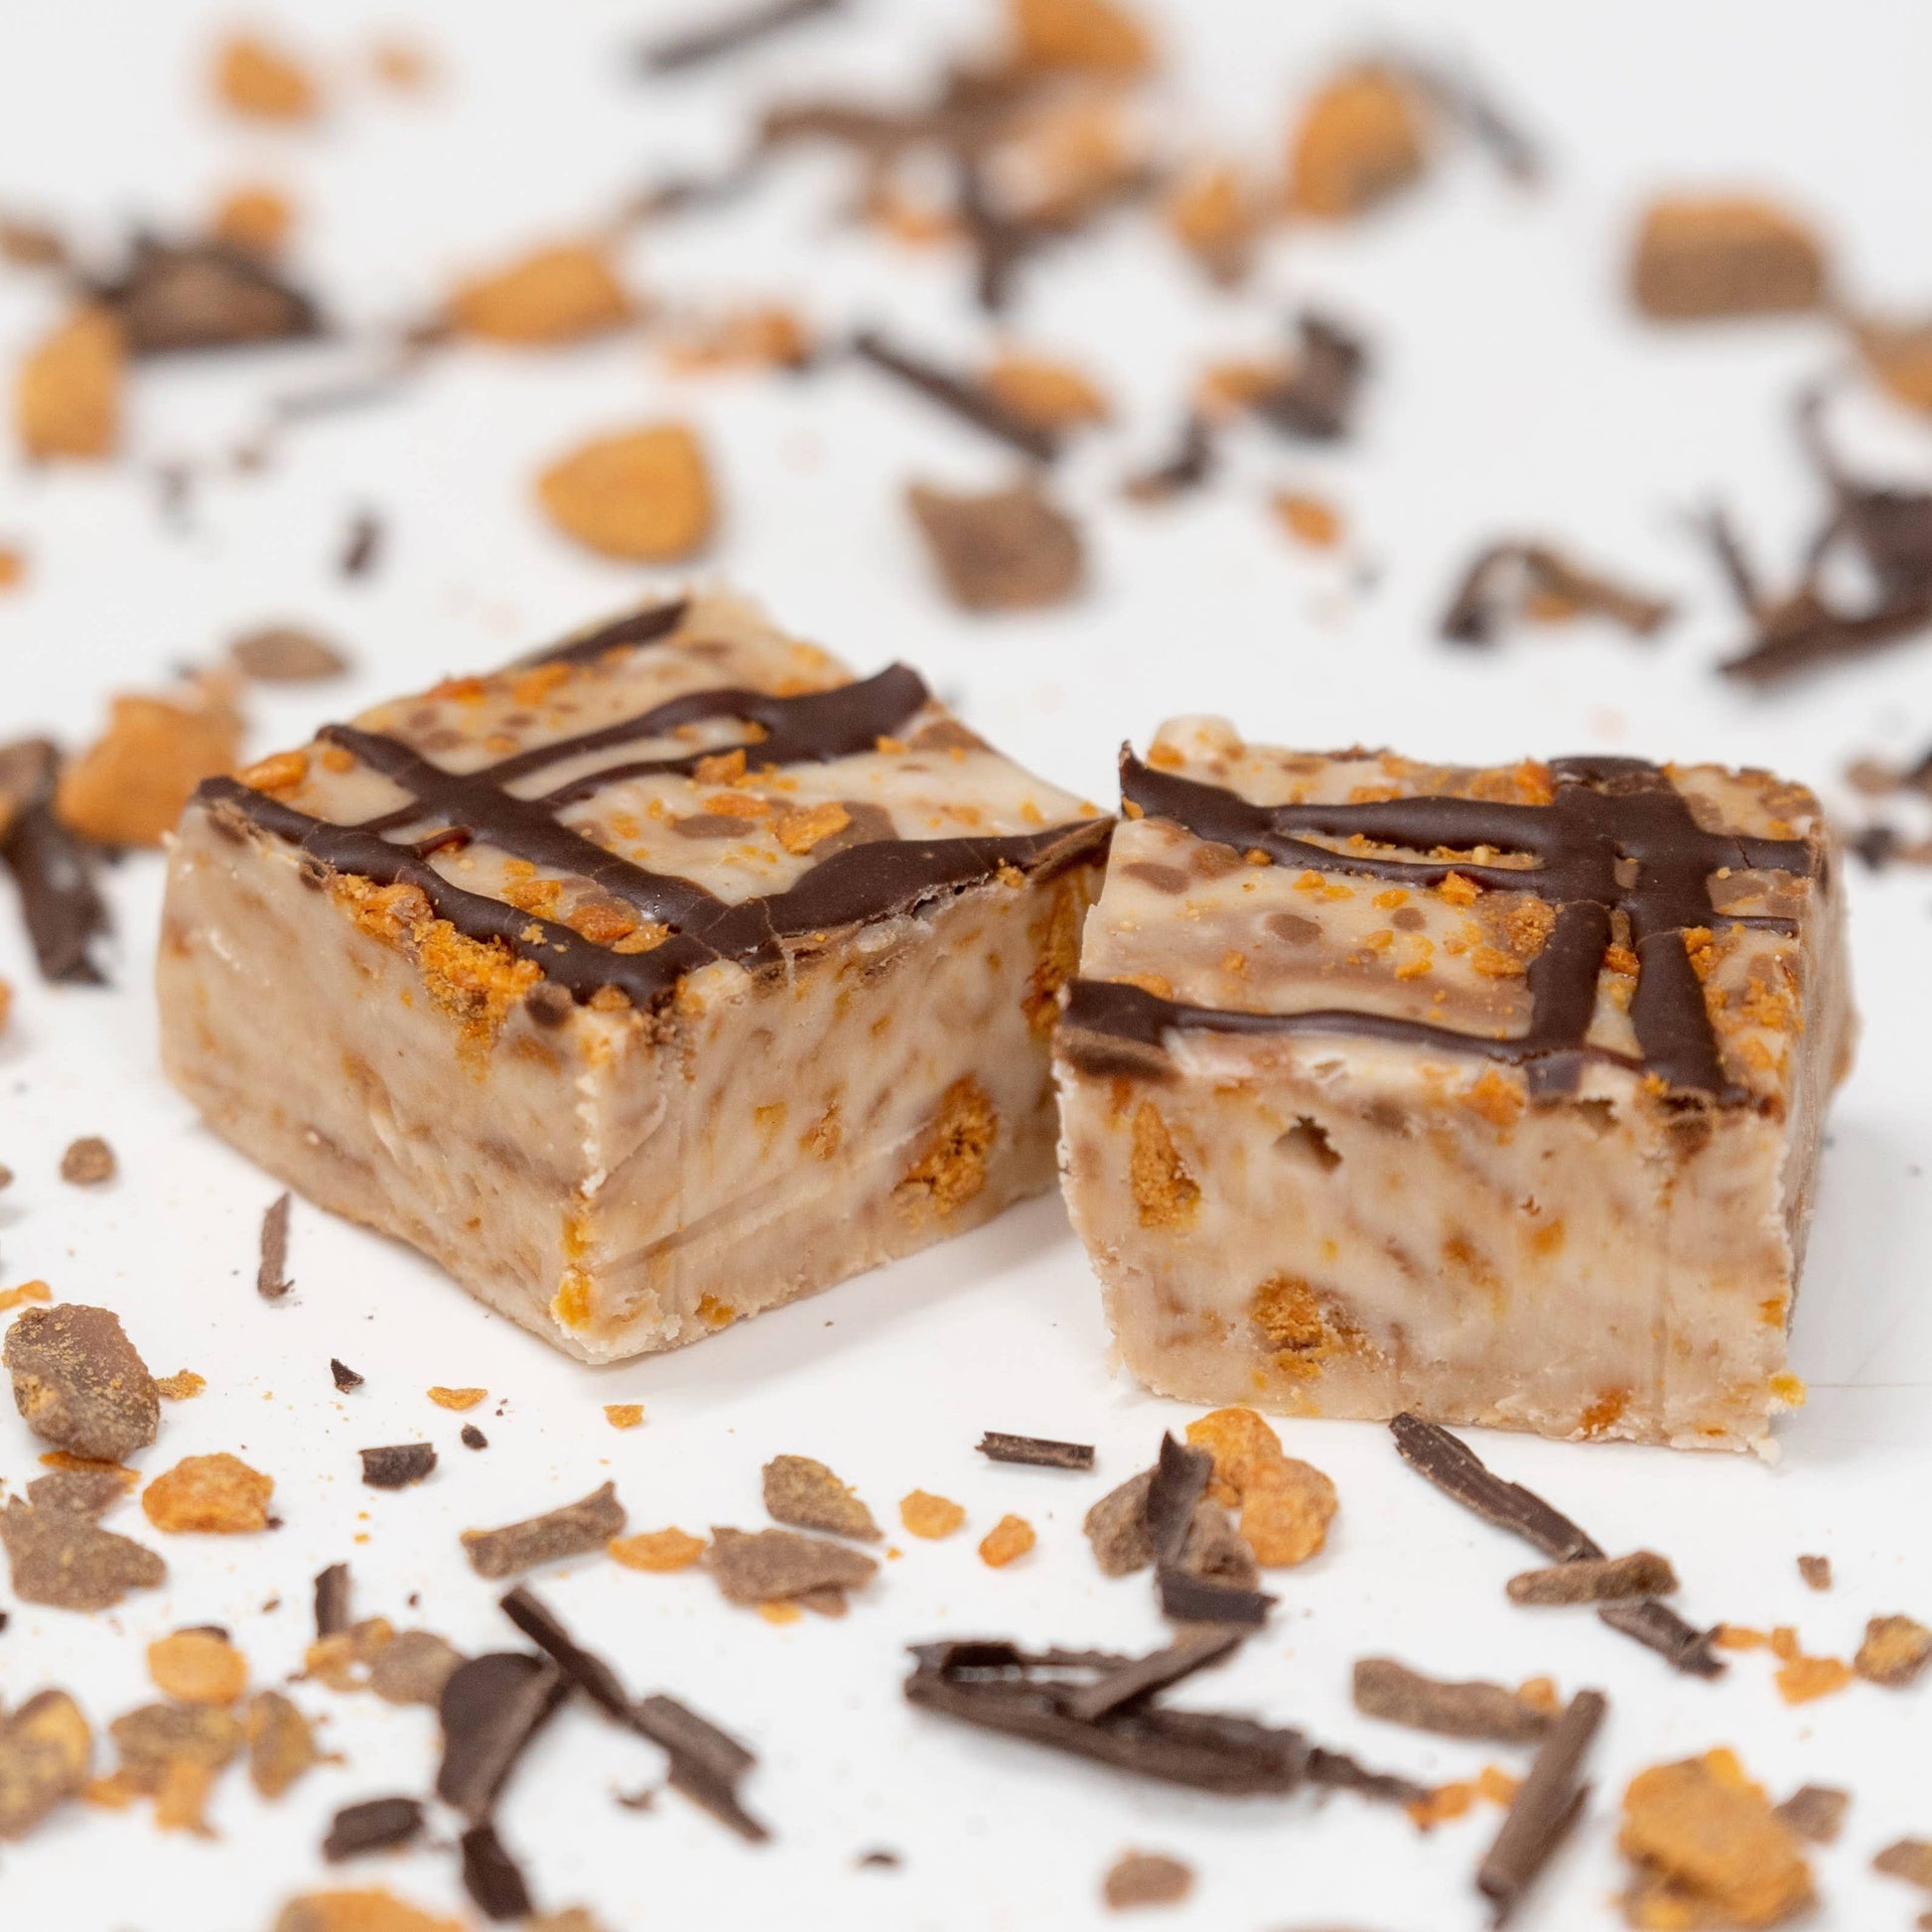 Valley Fudge - Vanilla Fudge with Butterfinger Pieces (1/2 lb Package)